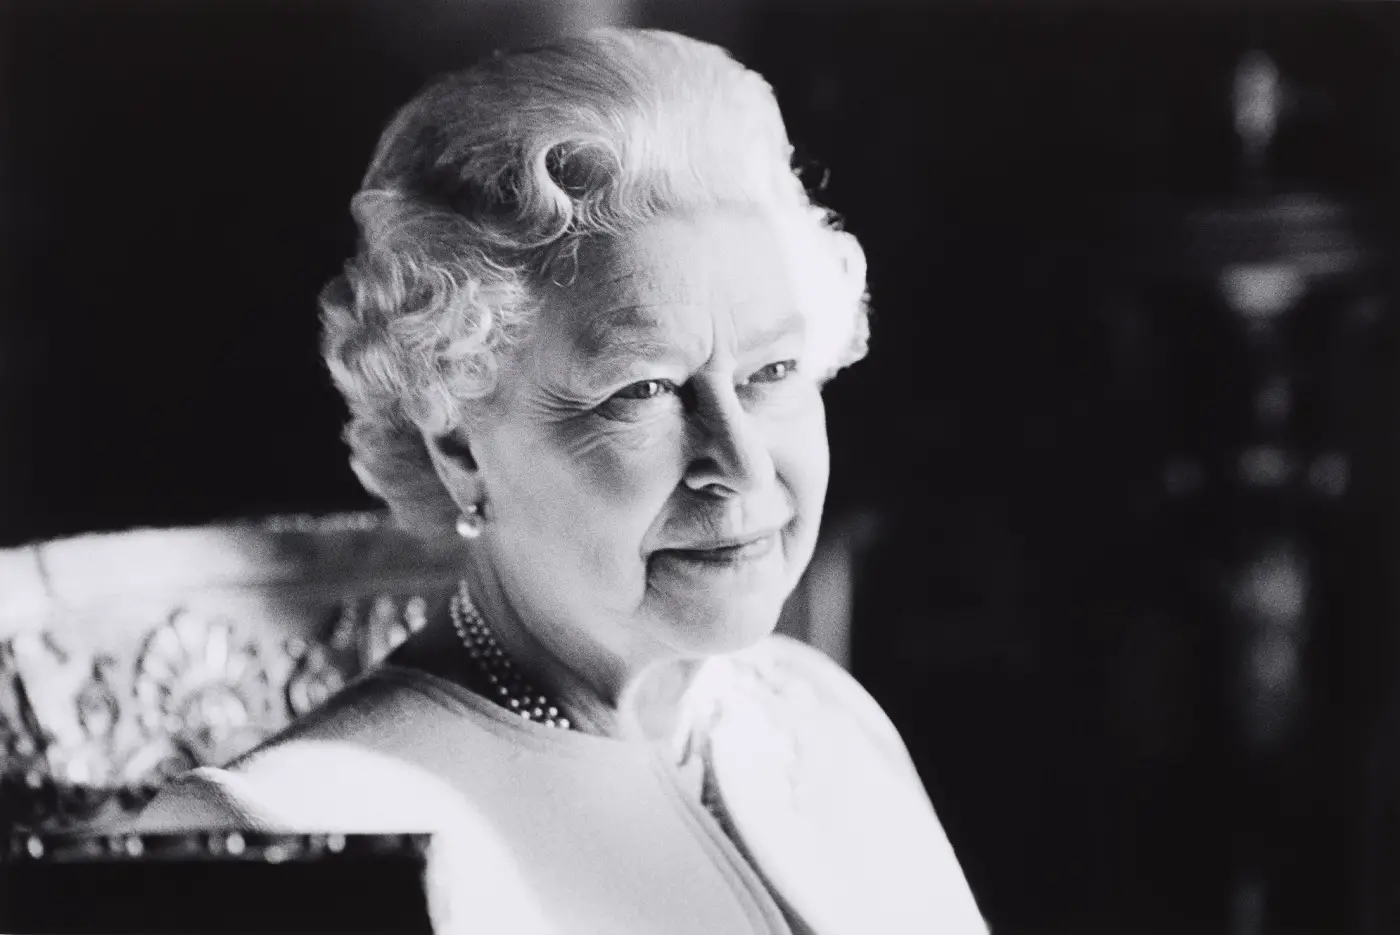 Queen Elizabeth II died peacefully at Balmoral at the age of 96